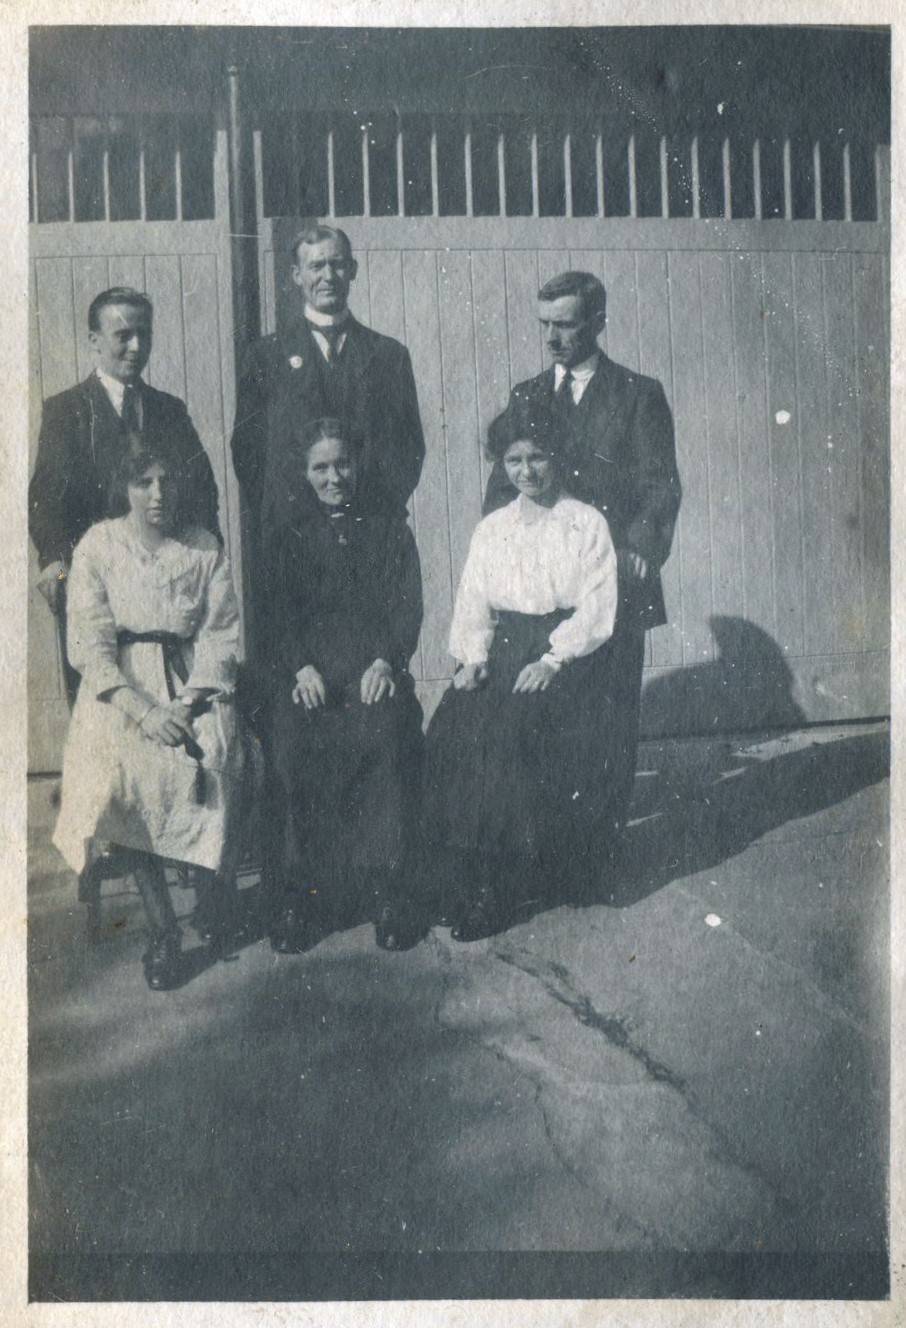 Posed group of three men in suits standing and three women seated in front, St Mary's stables, Bedfont, Middlesex, 1920